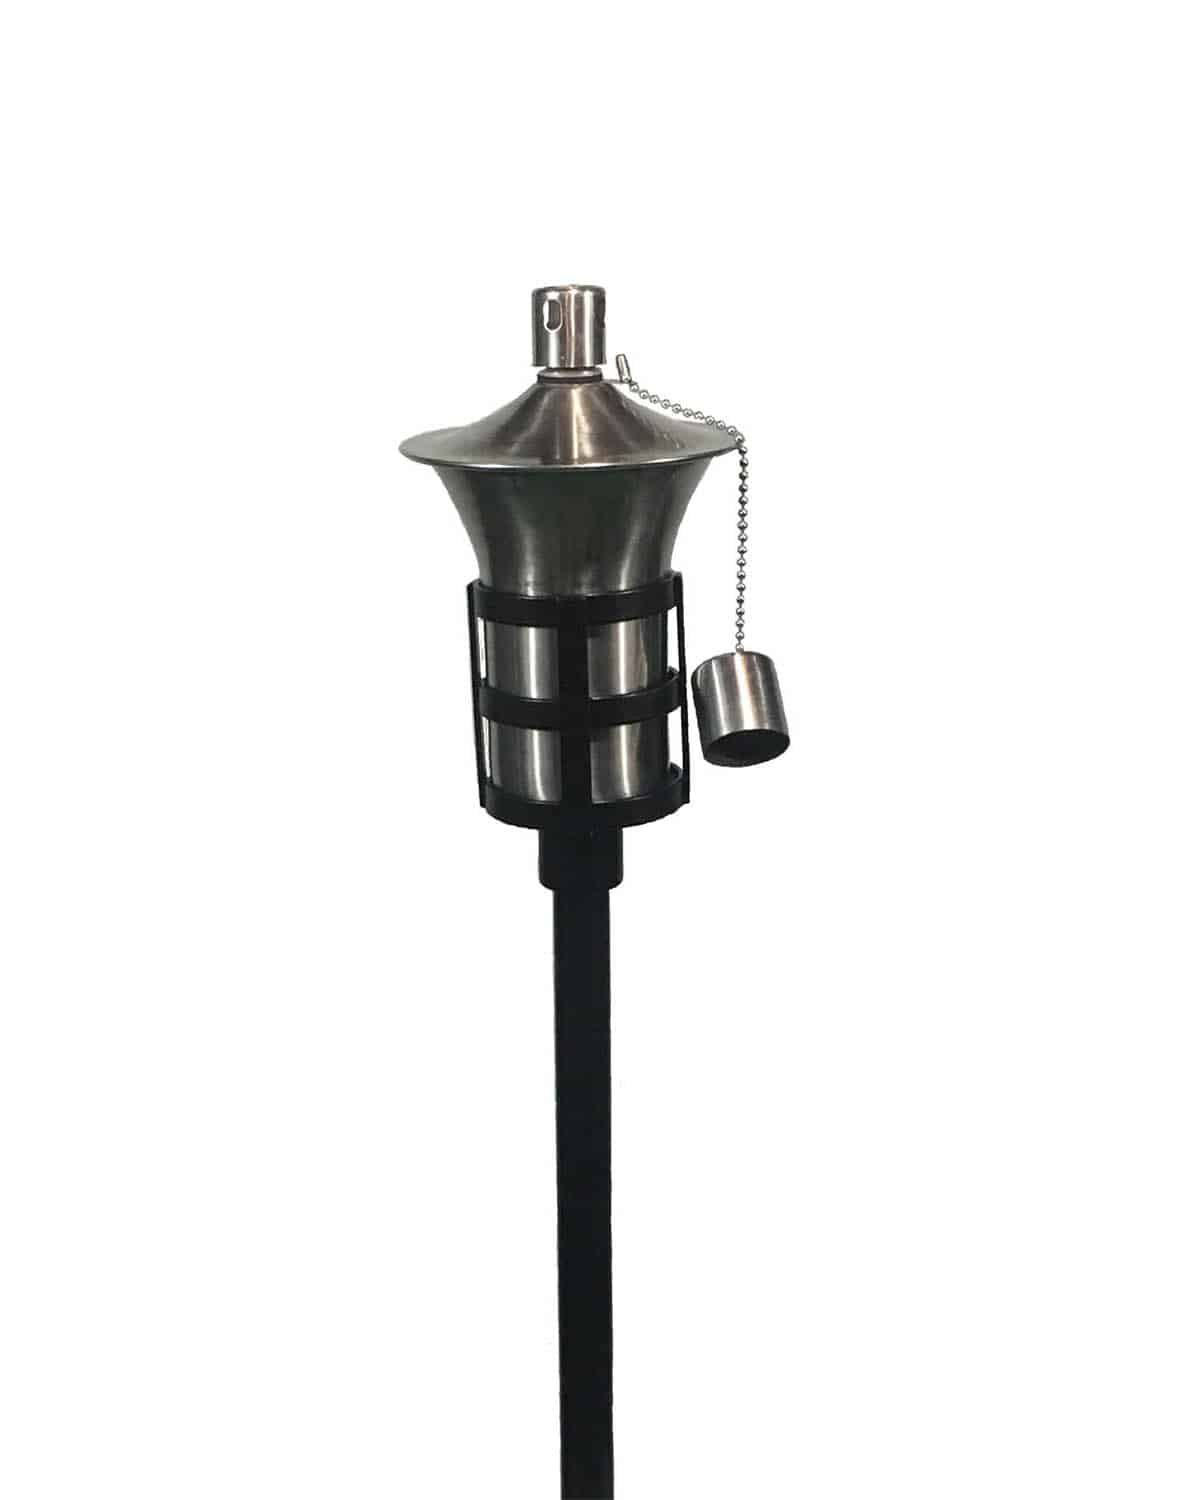 Tru-Post® Stainless Steel Torch Tru-Scapes Deck Lighting